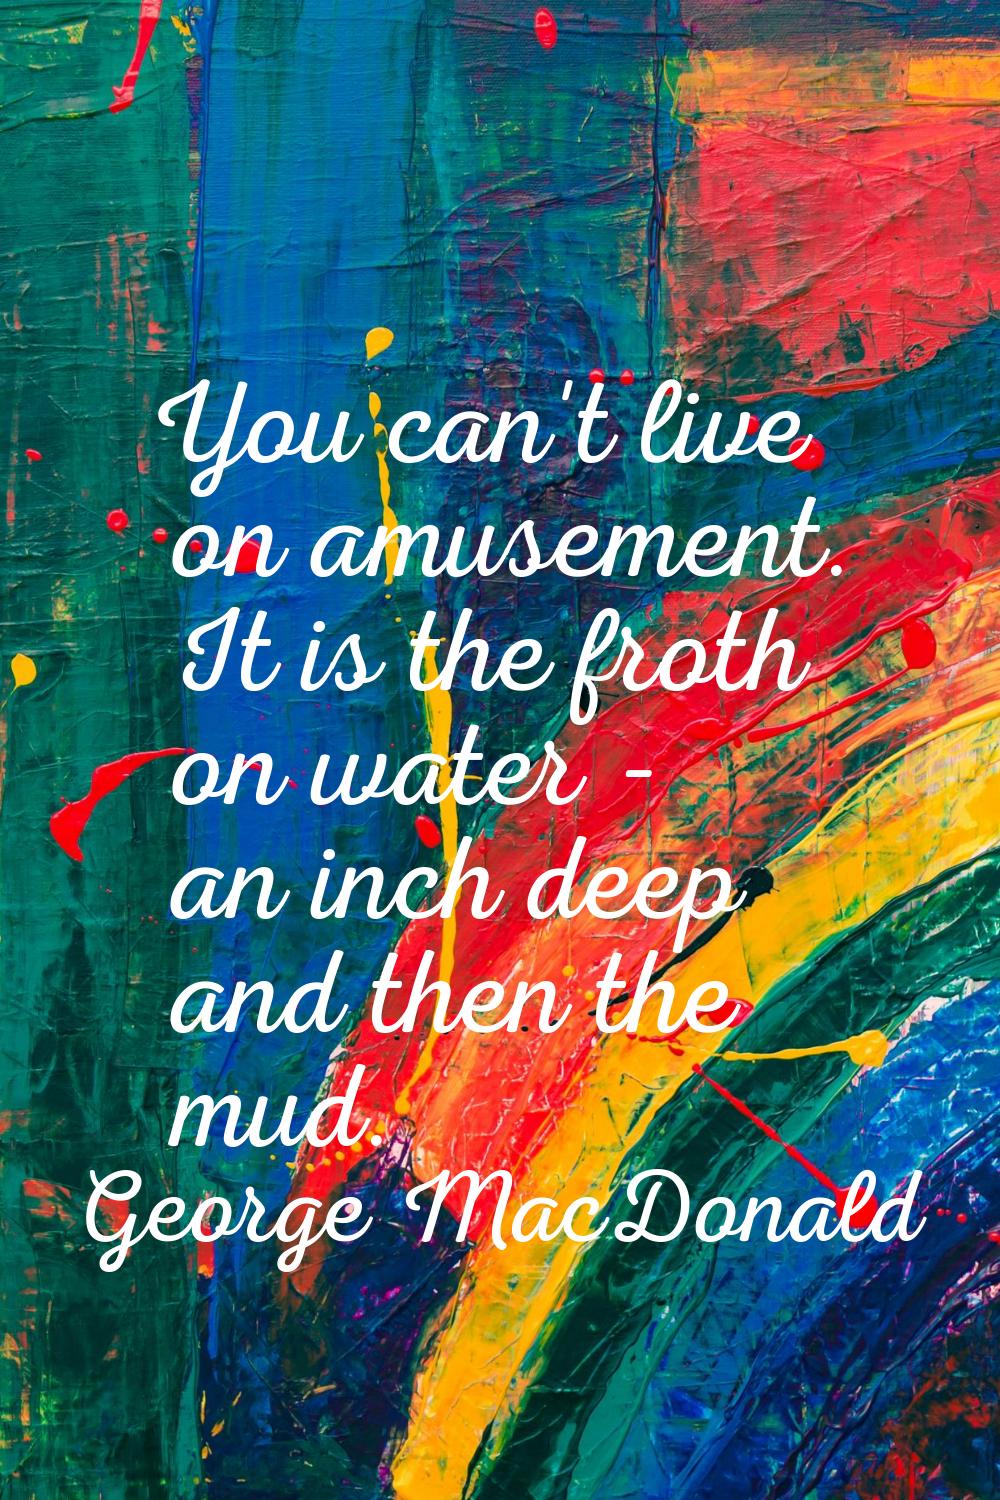 You can't live on amusement. It is the froth on water - an inch deep and then the mud.